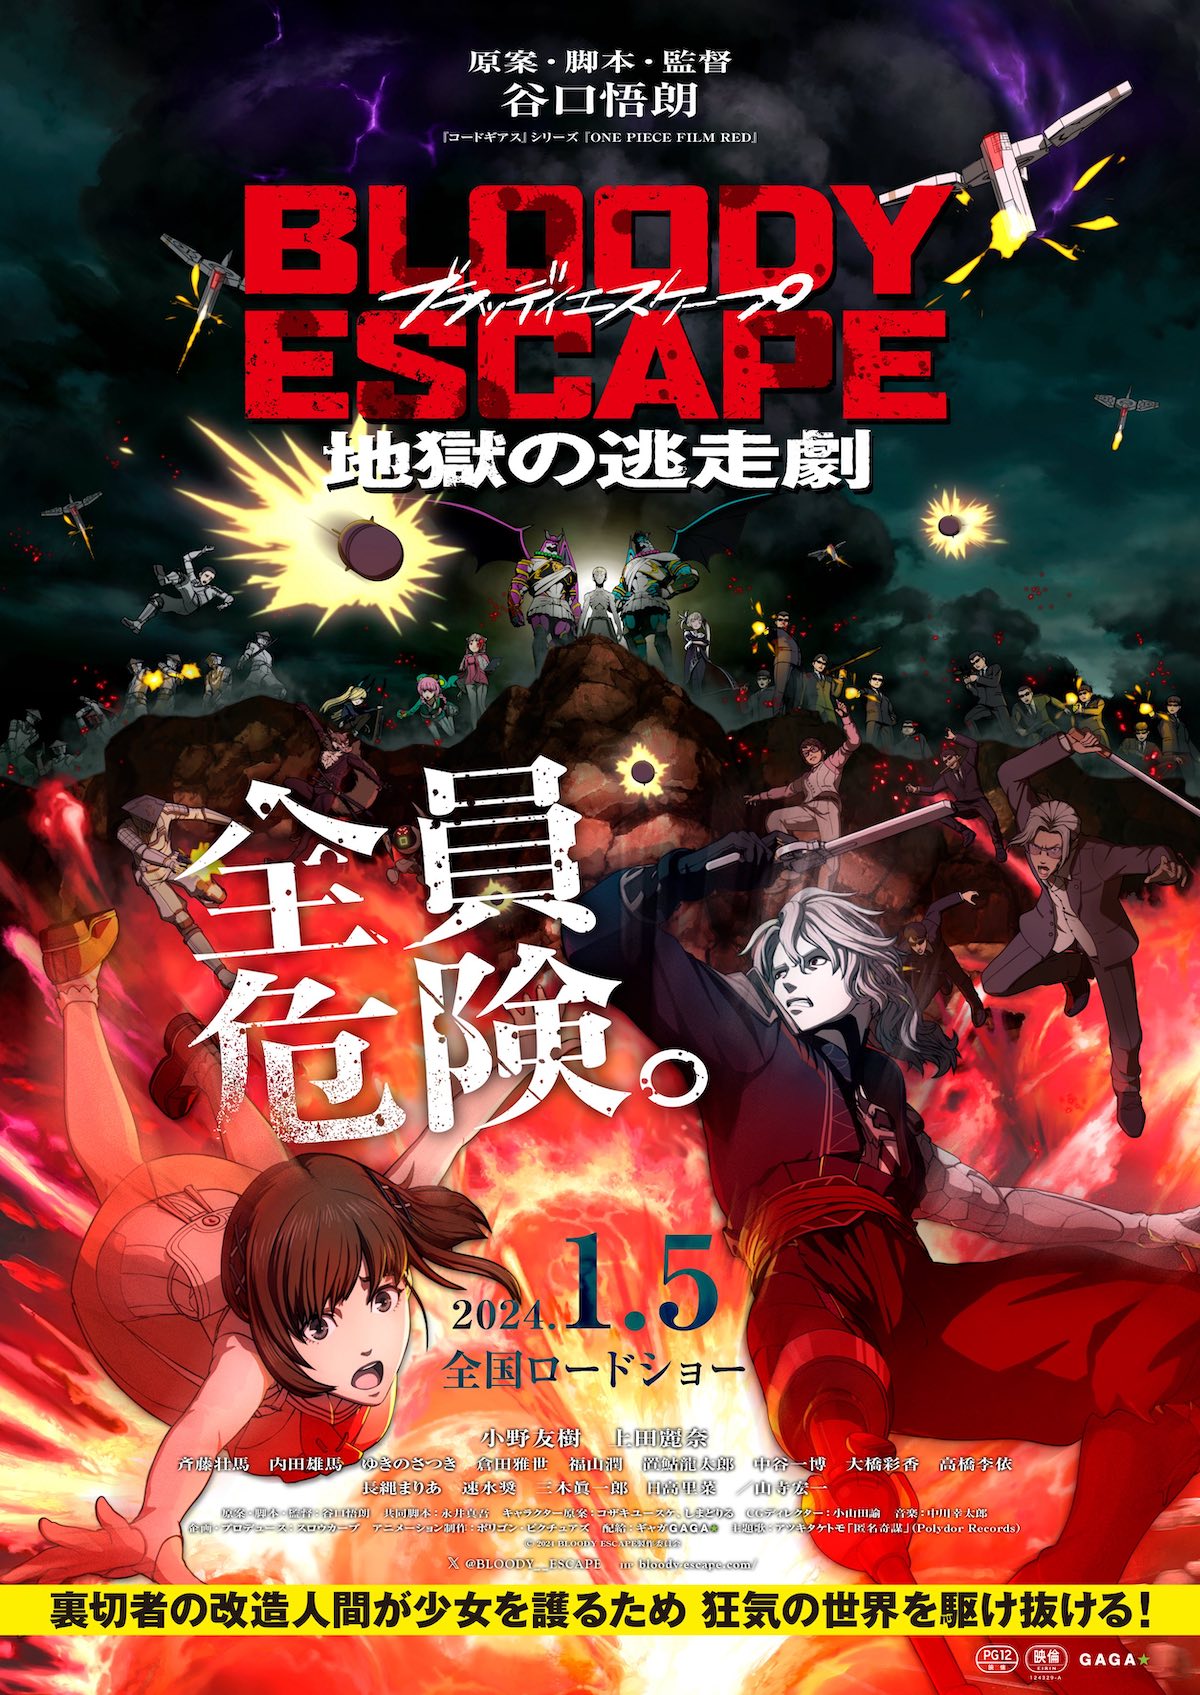 『BLOODY ESCAPE -地獄の逃走劇-』